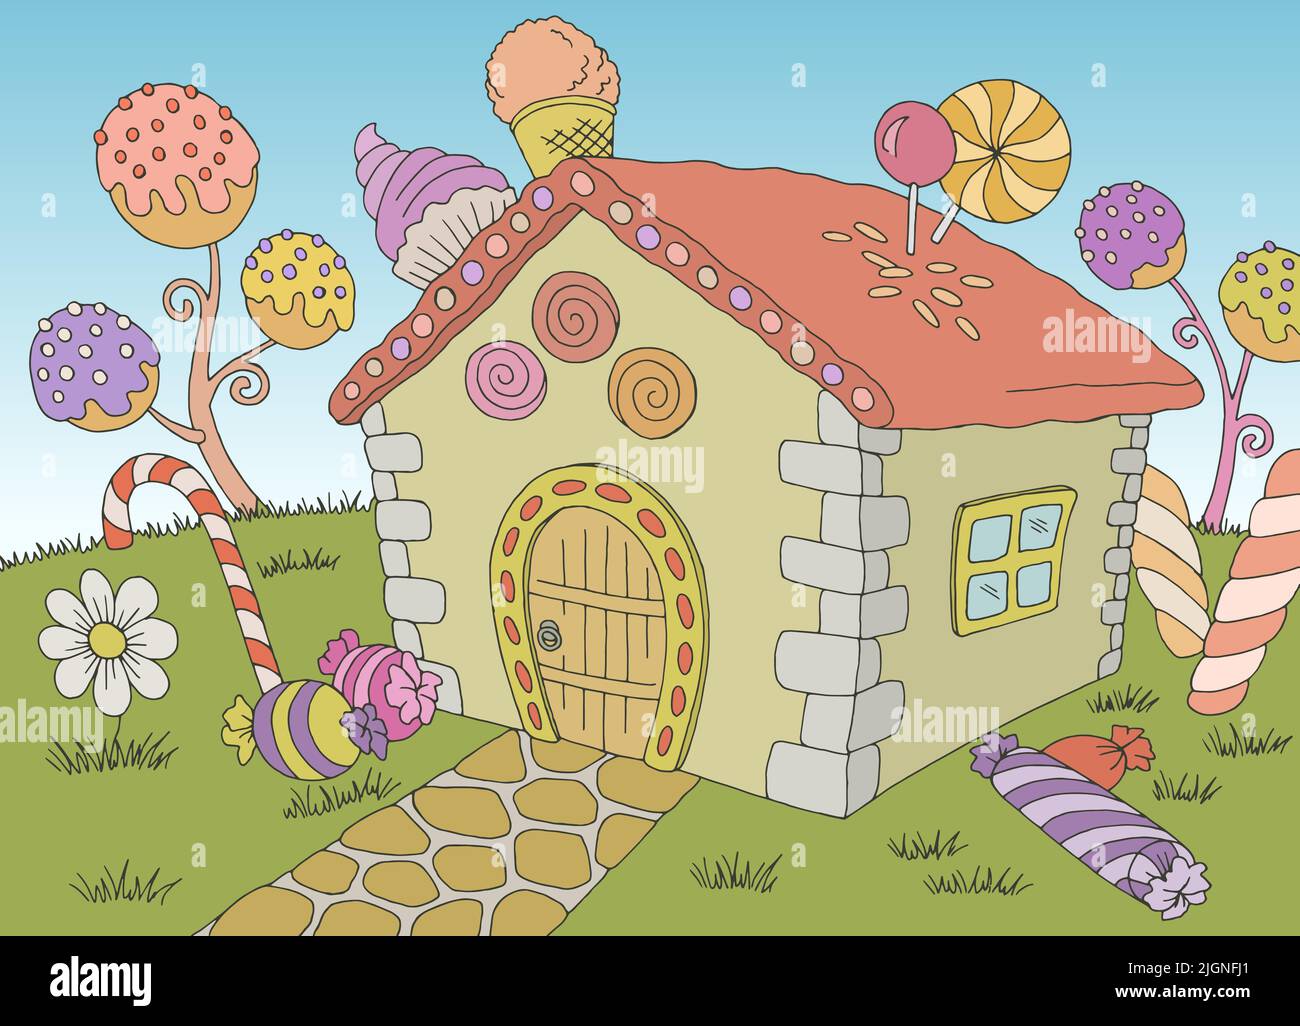 Candy house building exterior graphic color landscape sketch illustration vector Stock Vector